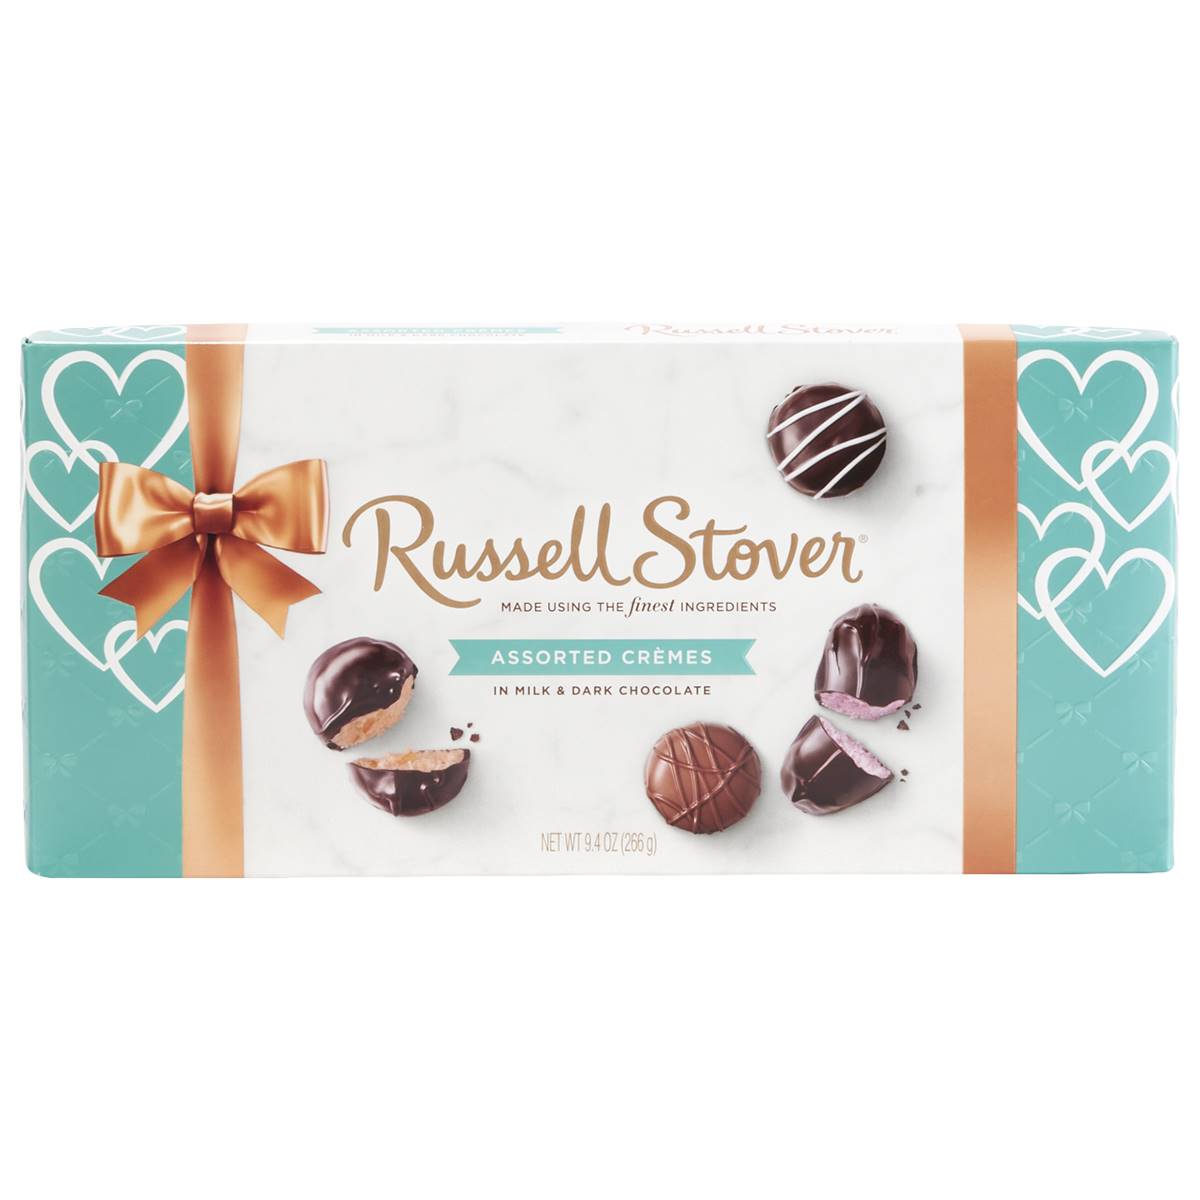 Russel Stover 9.4oz. Assorted Creme Valentine Box